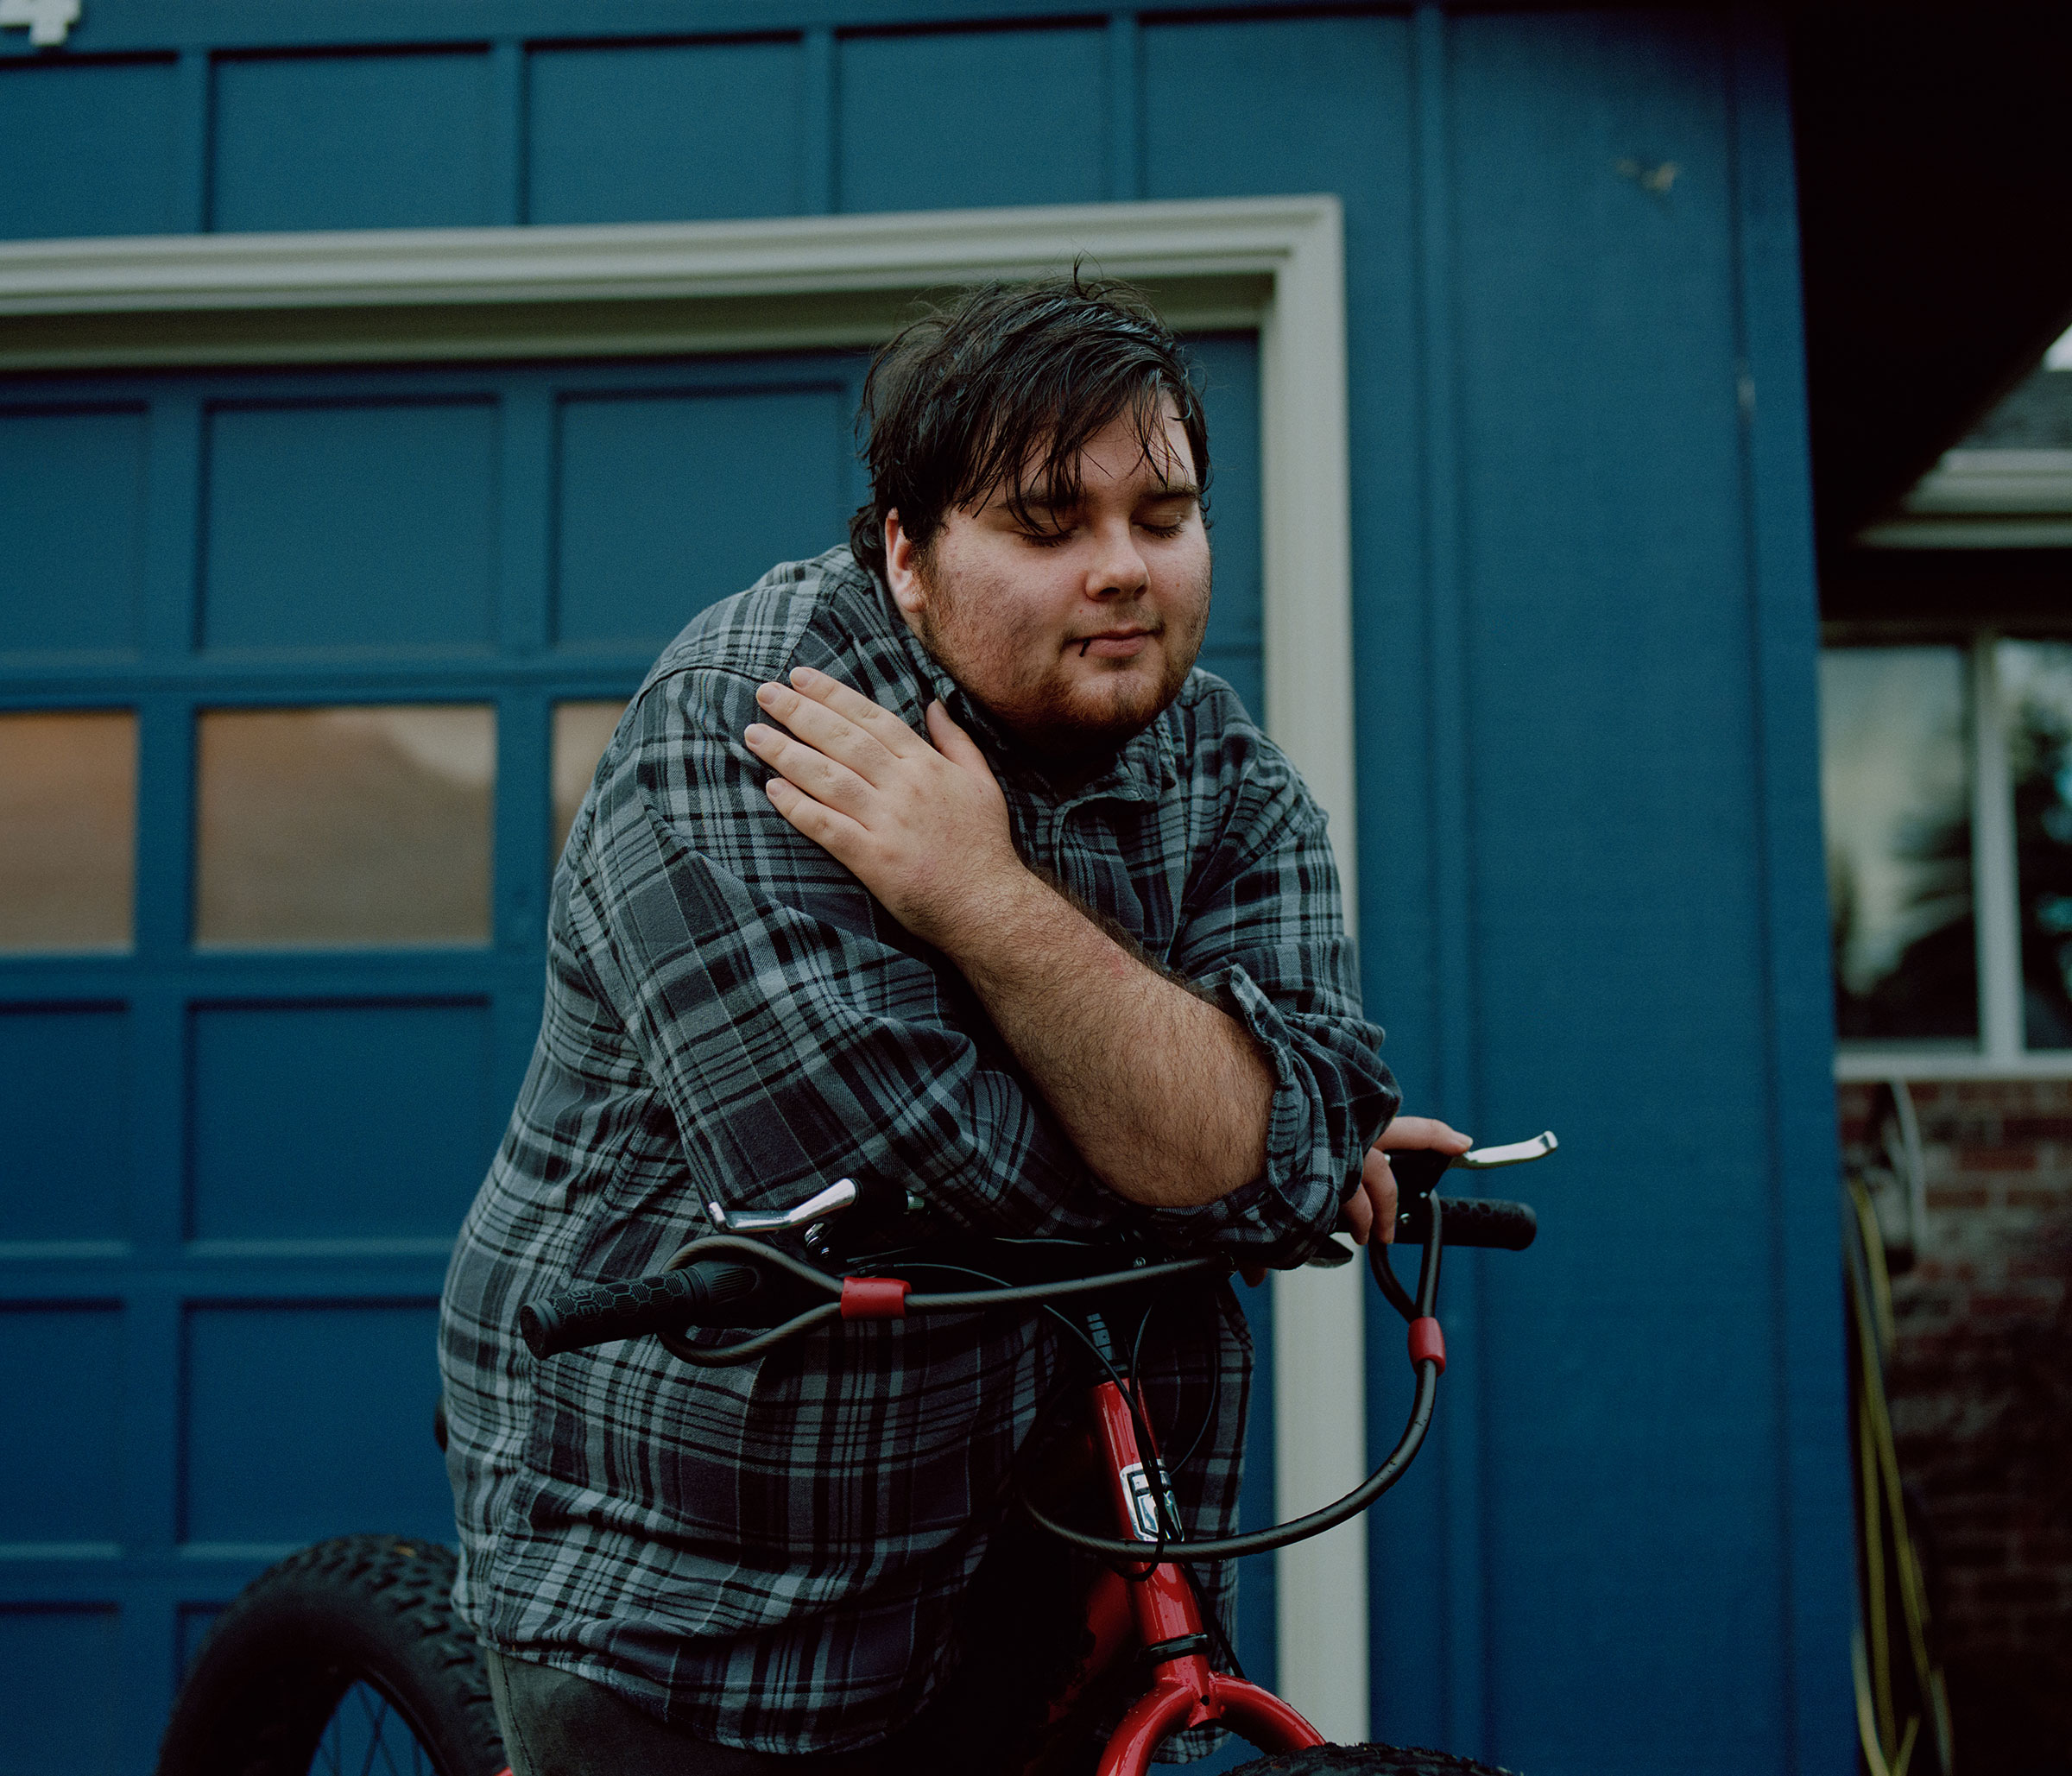 <strong>Benjerman Xander</strong>, pictured at his home in Portland, Ore. "<a href="https://time.com/6124930/oregon-foster-care-trans-youth-lawsuit/">America's Foster Care System Is a Dangerous Place for Trans Teens. Now They're Fighting for Change</a>," Dec. 7. (Ricardo Nagaoka for TIME)